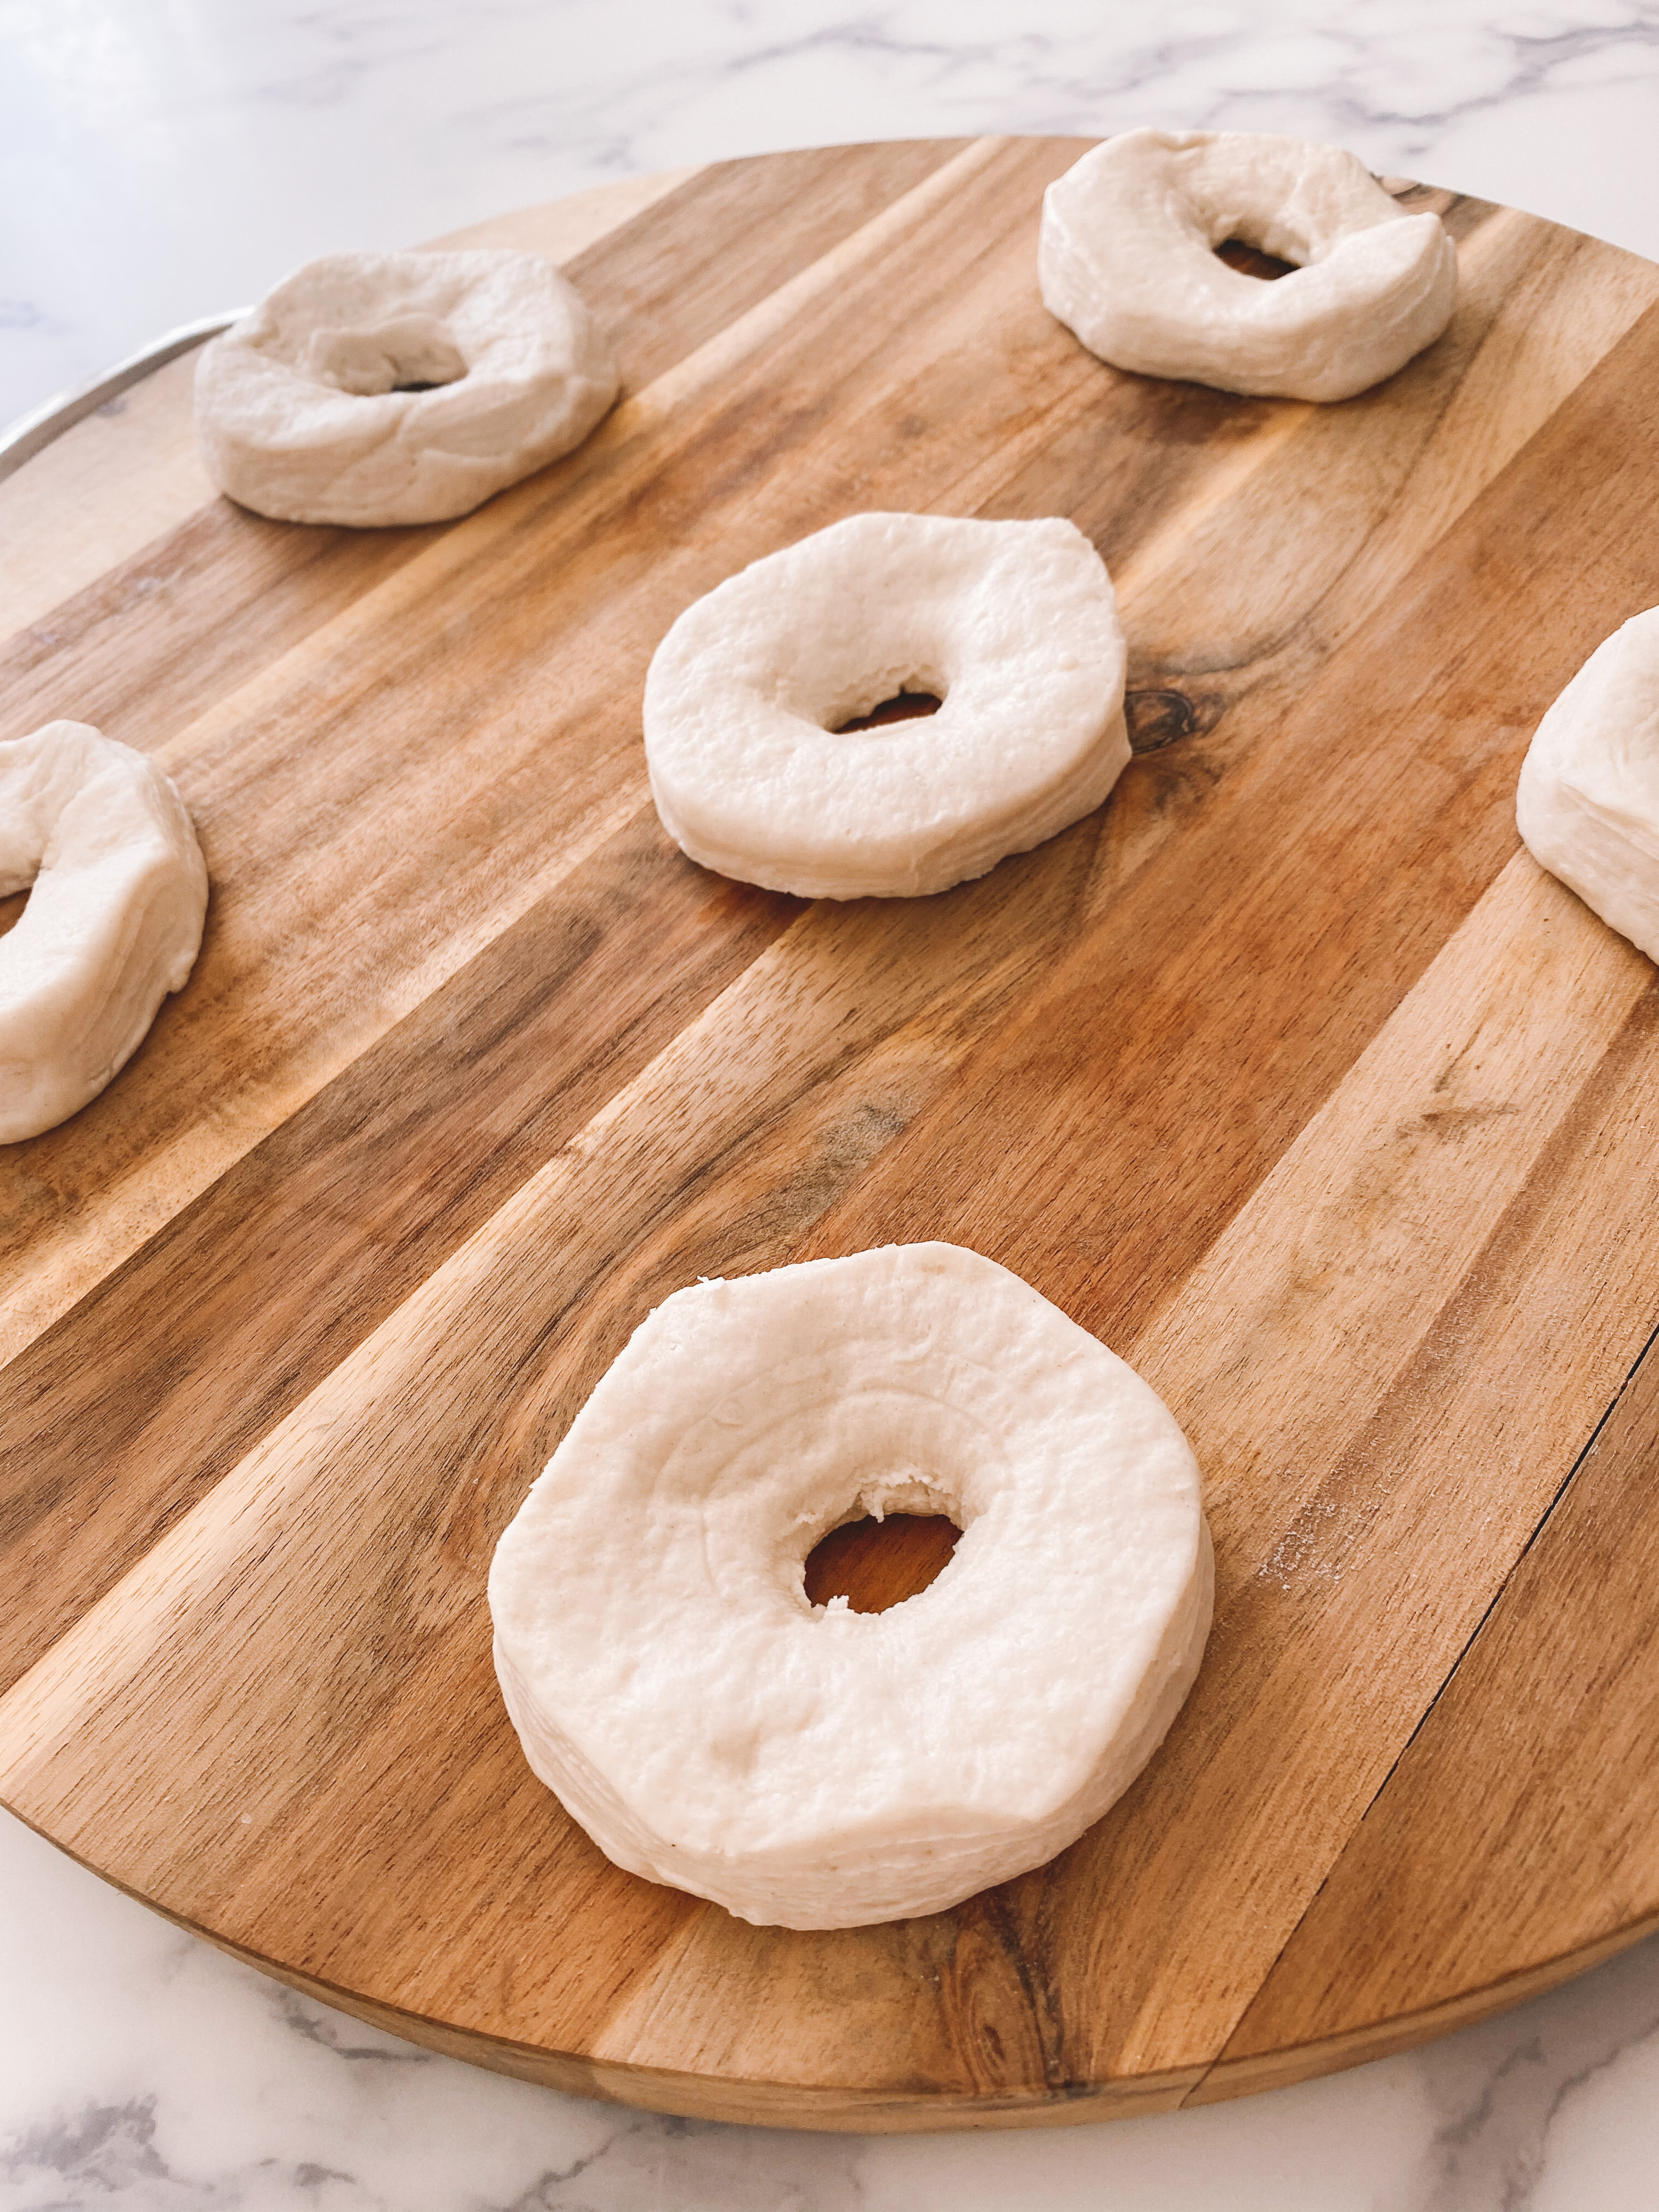 Two-Step Homemade Donuts